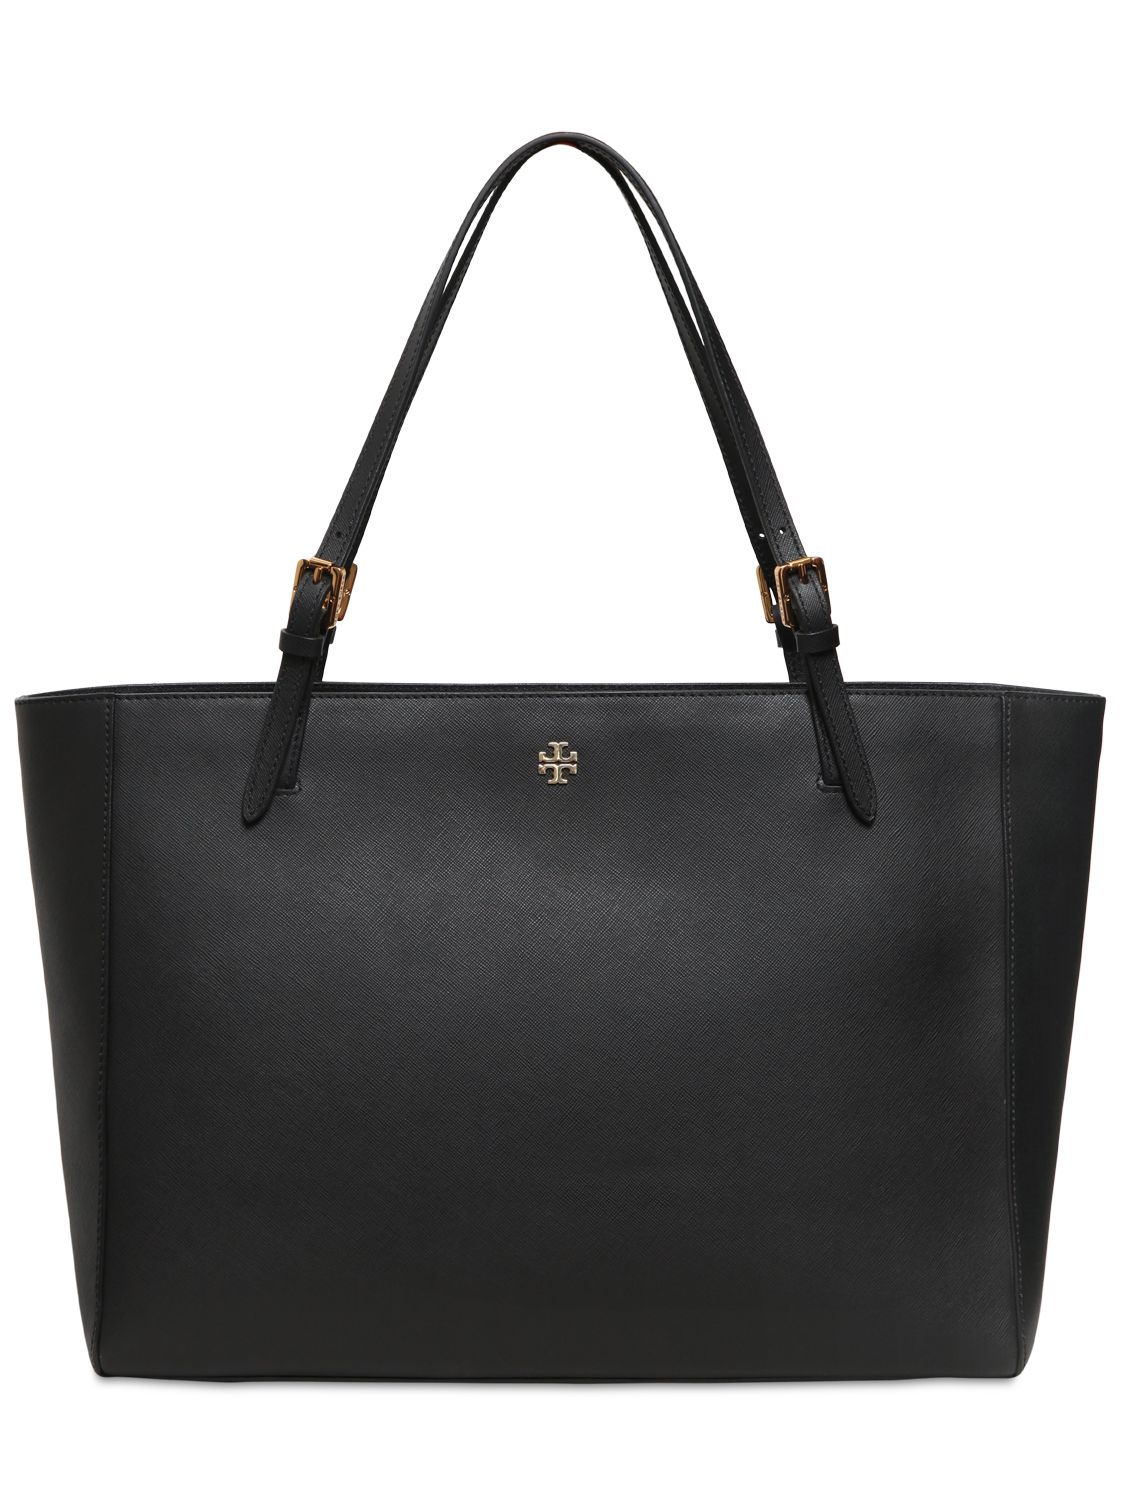 Tory Burch York Saffiano Embossed Leather Tote Bag in Black | Lyst